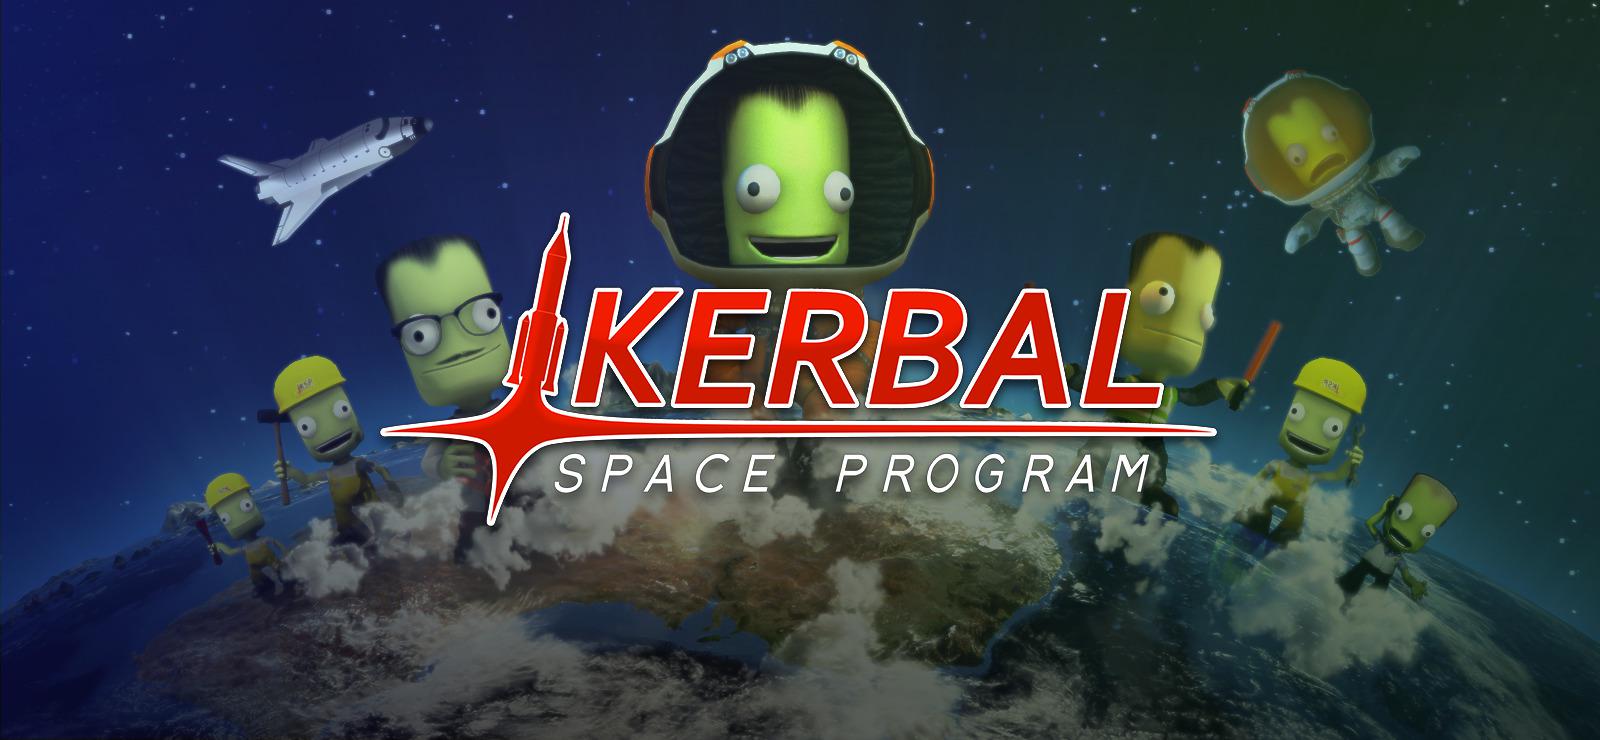 Kerbal-Space-Program-there-no-place-like-home